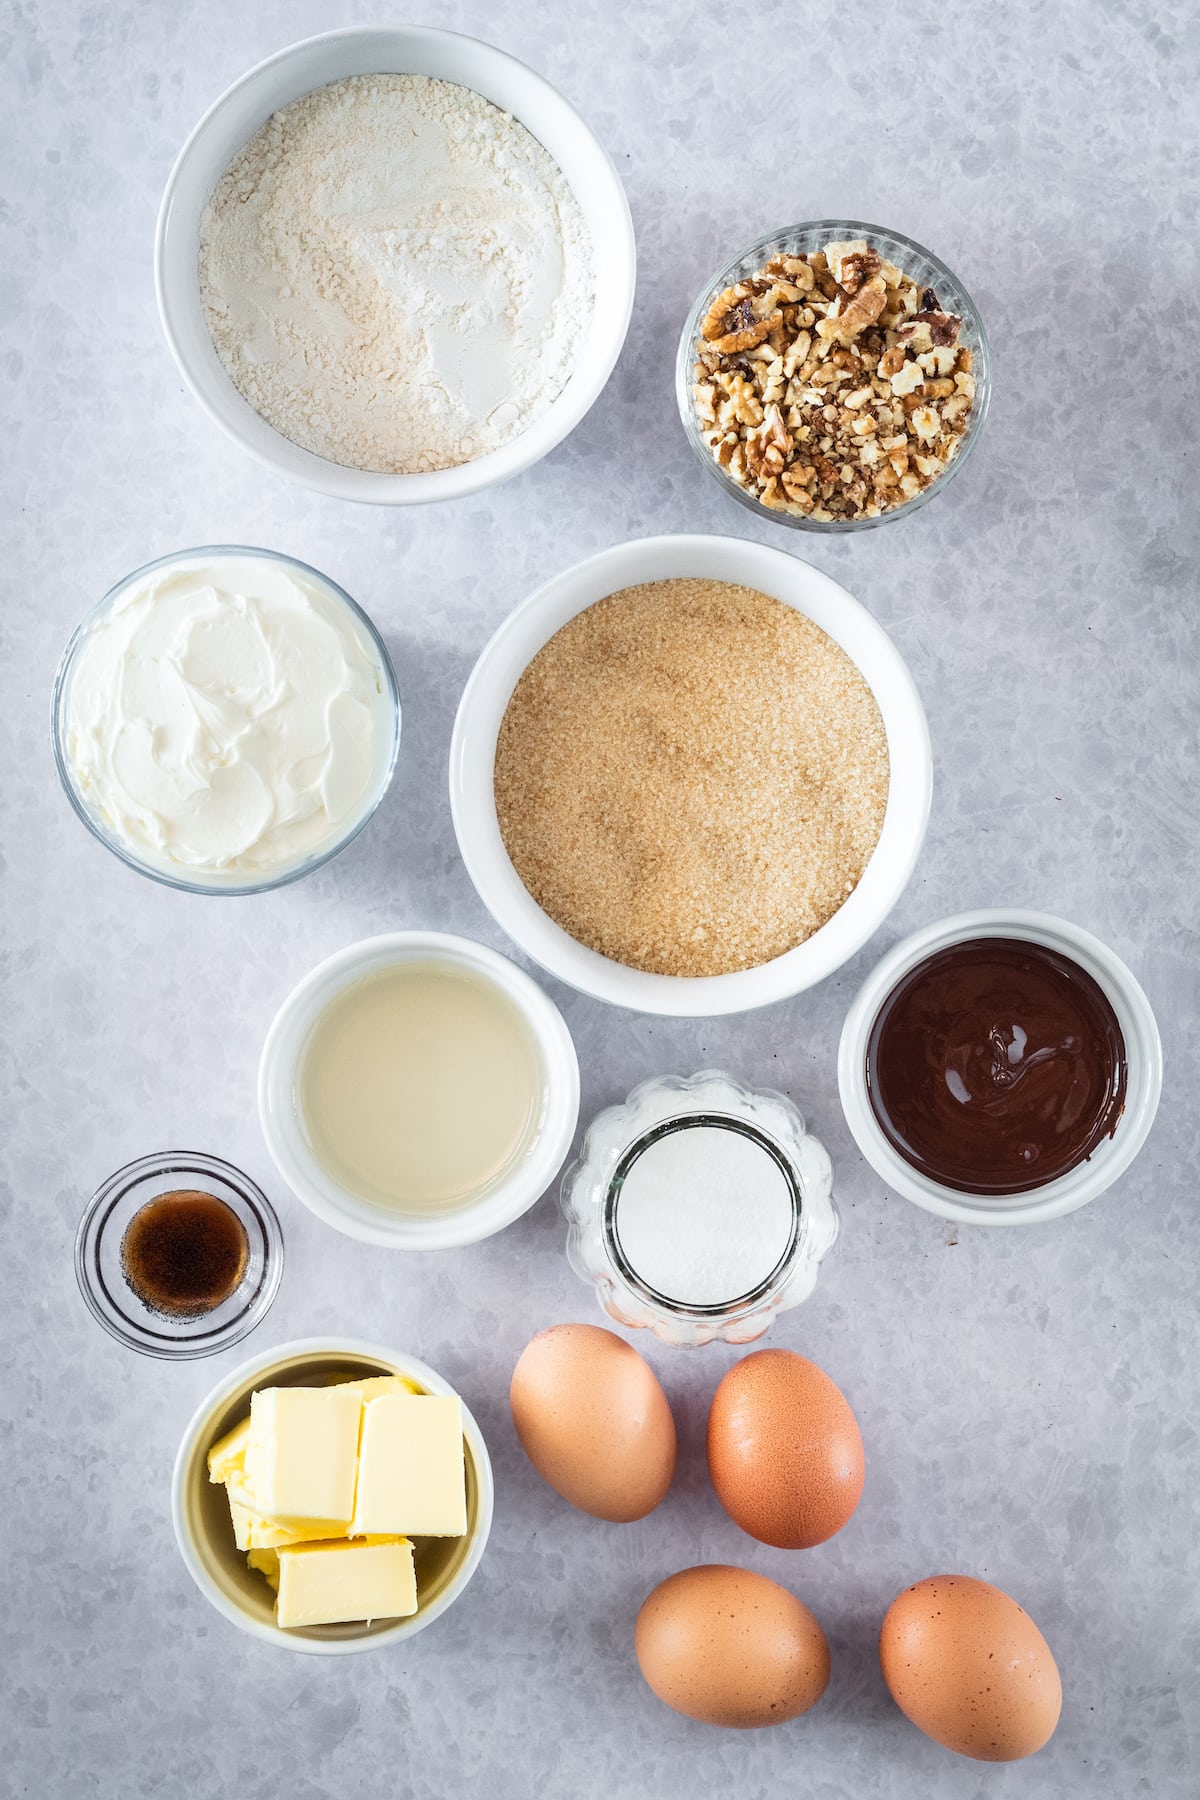 ingredients in small bowl for baking: eggs, flour, chocolate and pecans